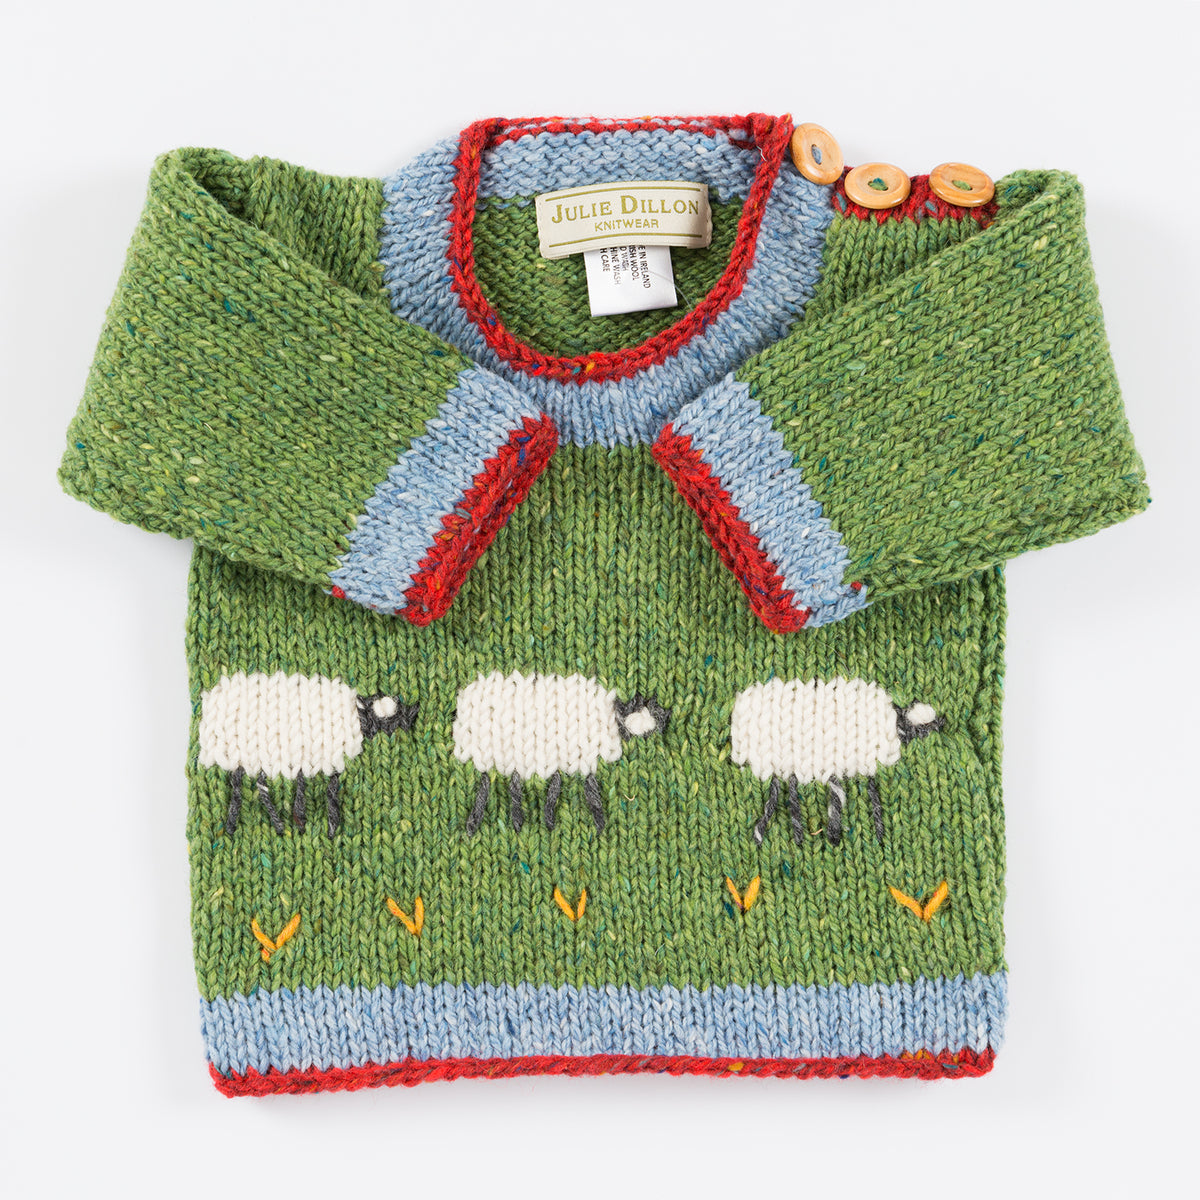 Handknitted Baby Jumper - Green with Sheep motif